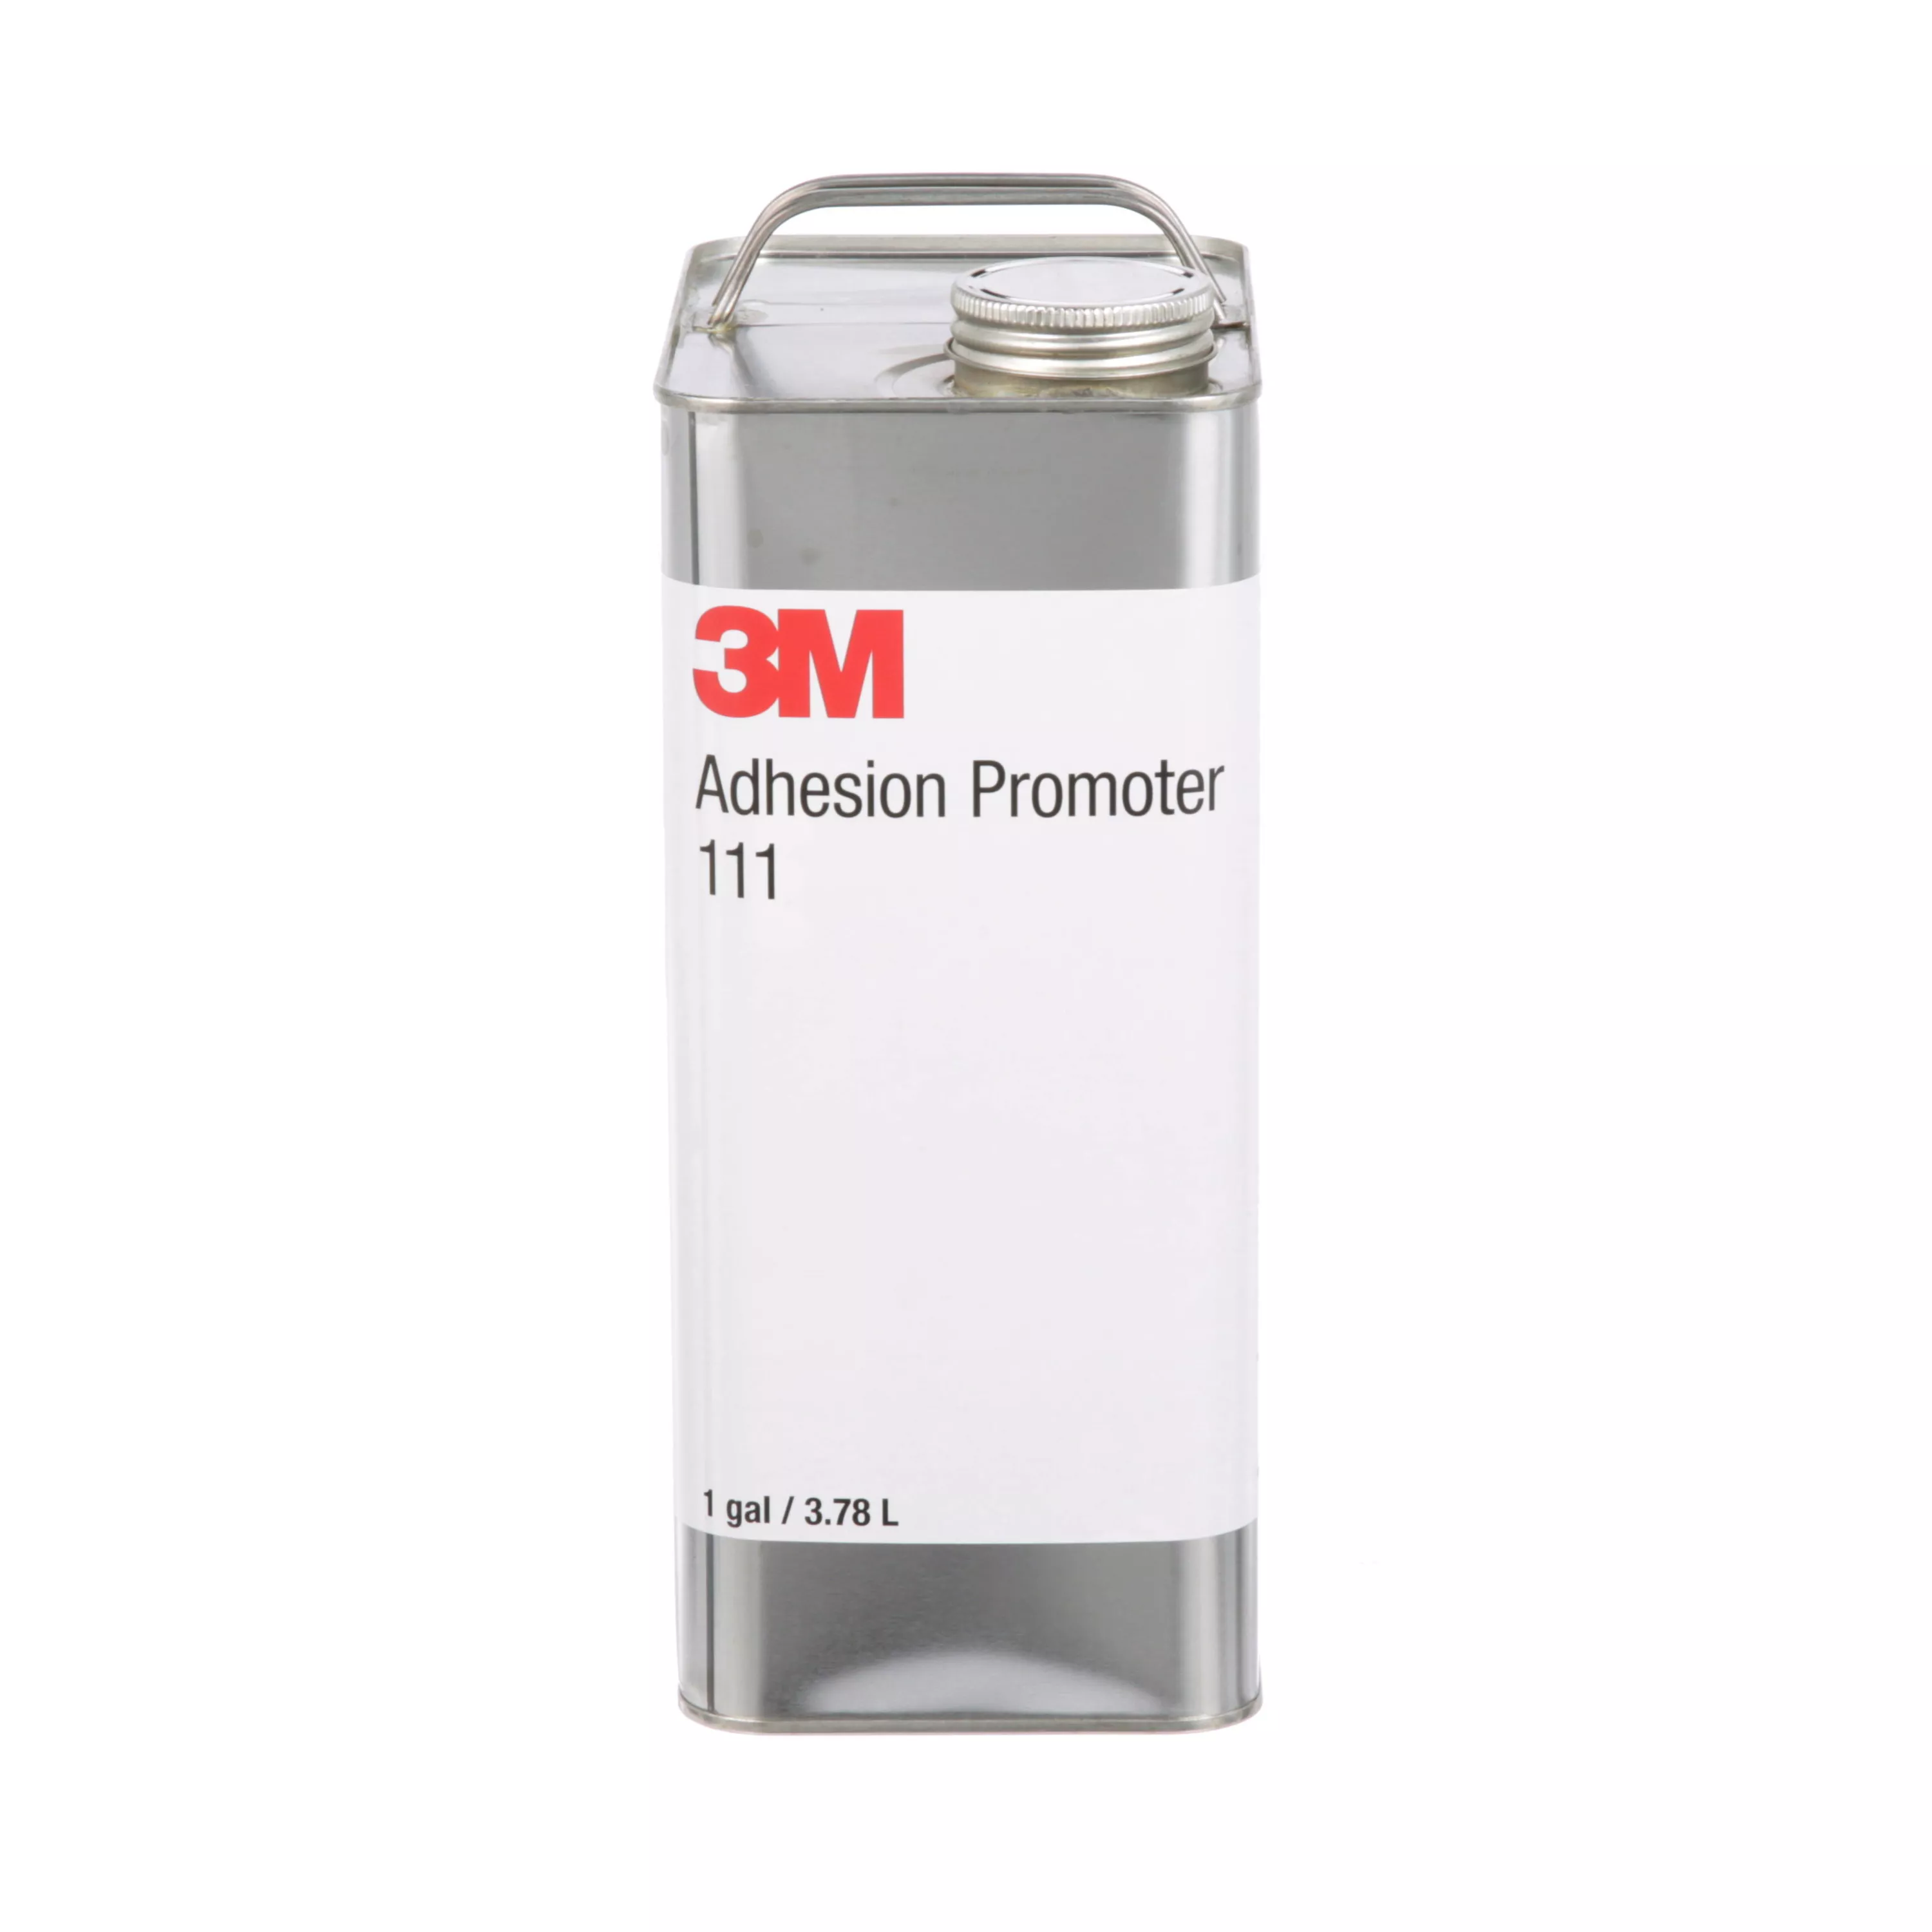 3M™ Adhesion Promoter 111, Clear, 1 Gallon Drum, 4 Can/Case